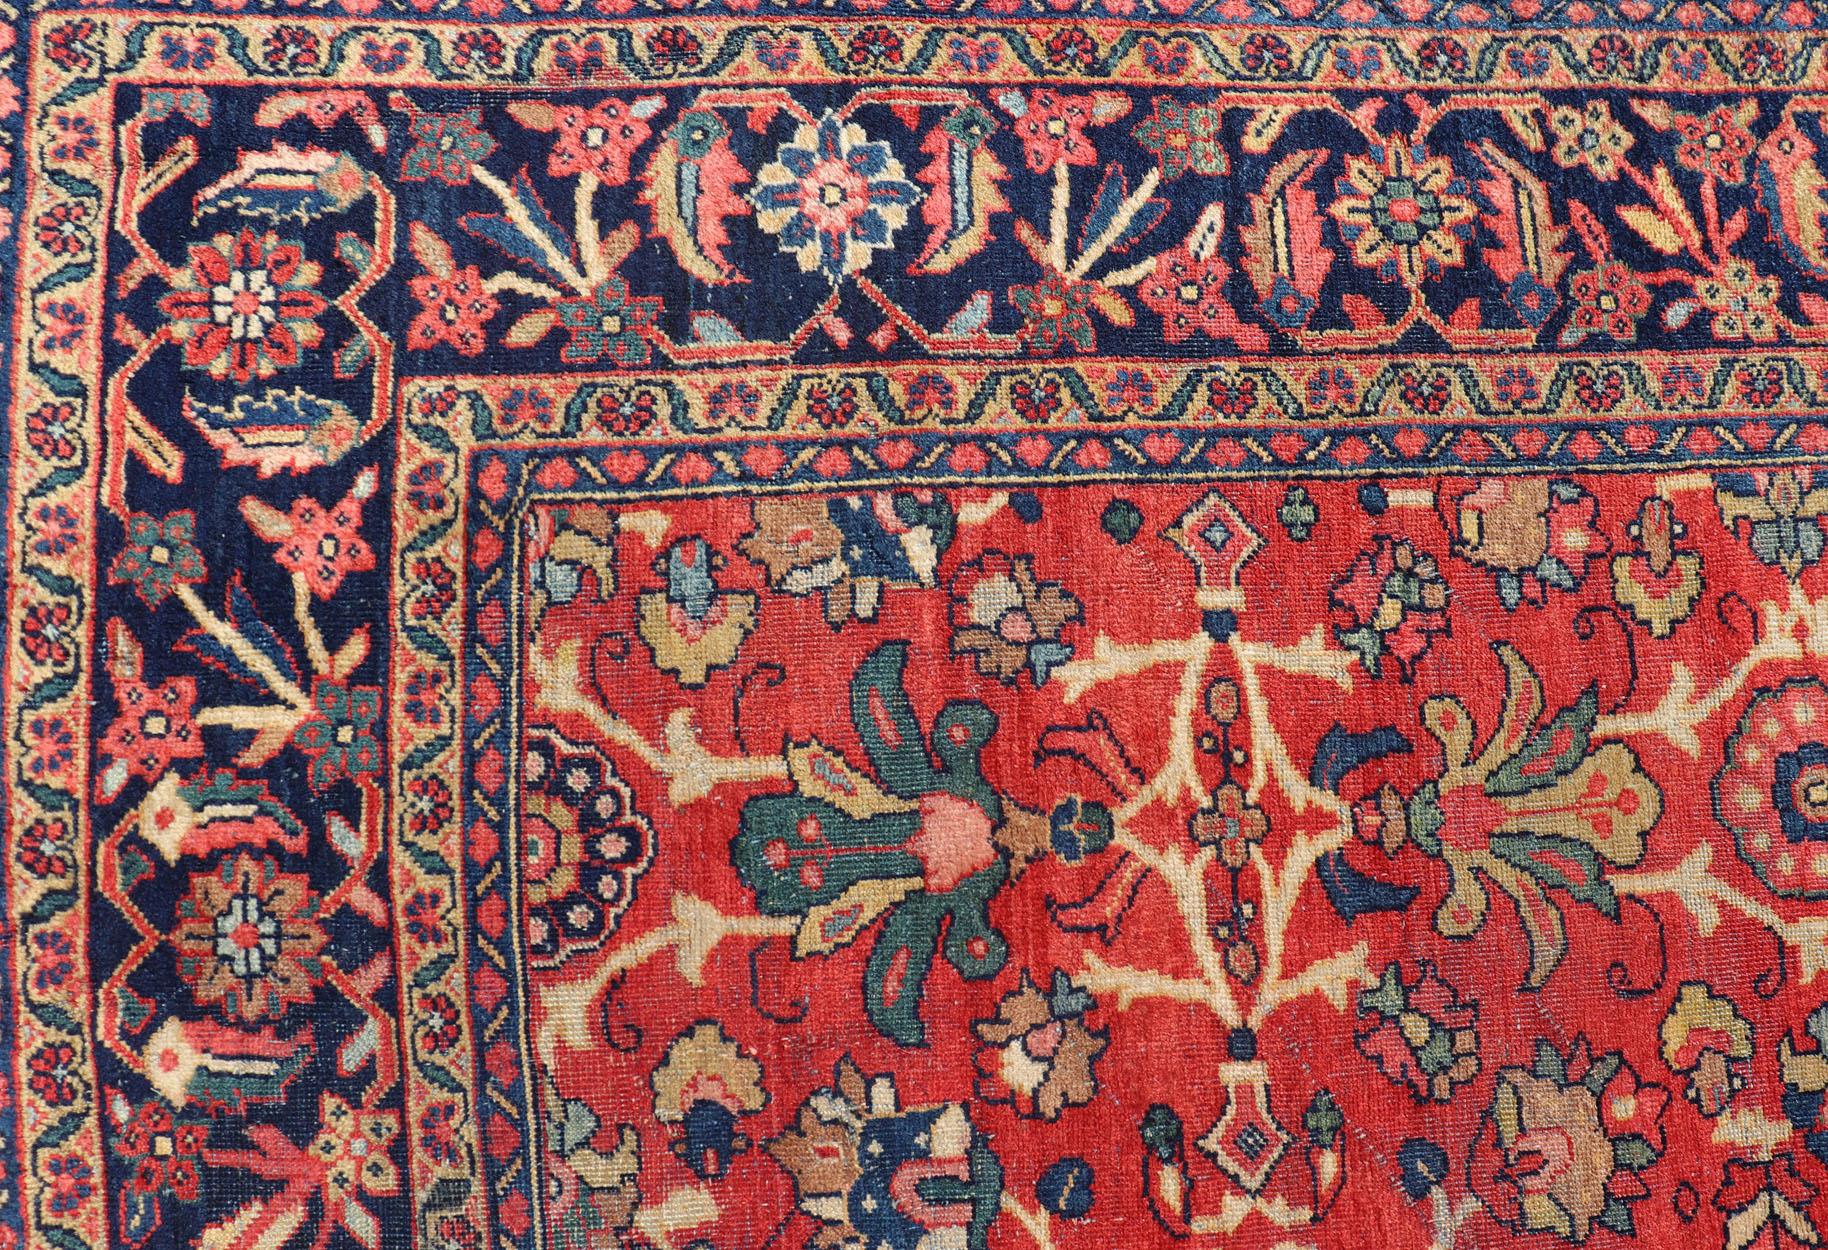 This antique hand-knotted Persian Mahal rug features an all-over sub-geometric floral design set upon a on red field. The entirety of this piece is enclosed within a complementary multi-tiered border.

Antique Persian Mahal, Keivan Woven Arts /